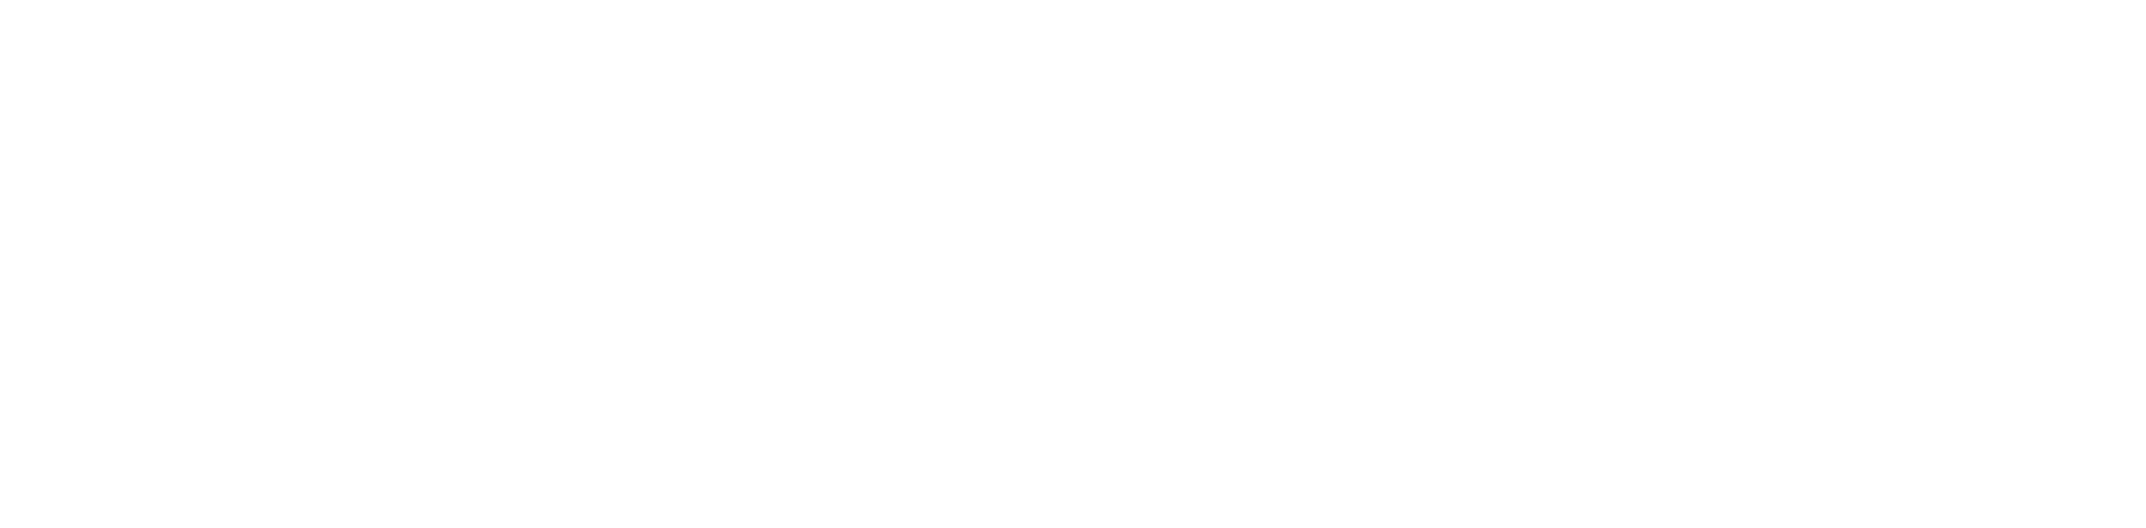 SMSF Loan Logo Powered By CL